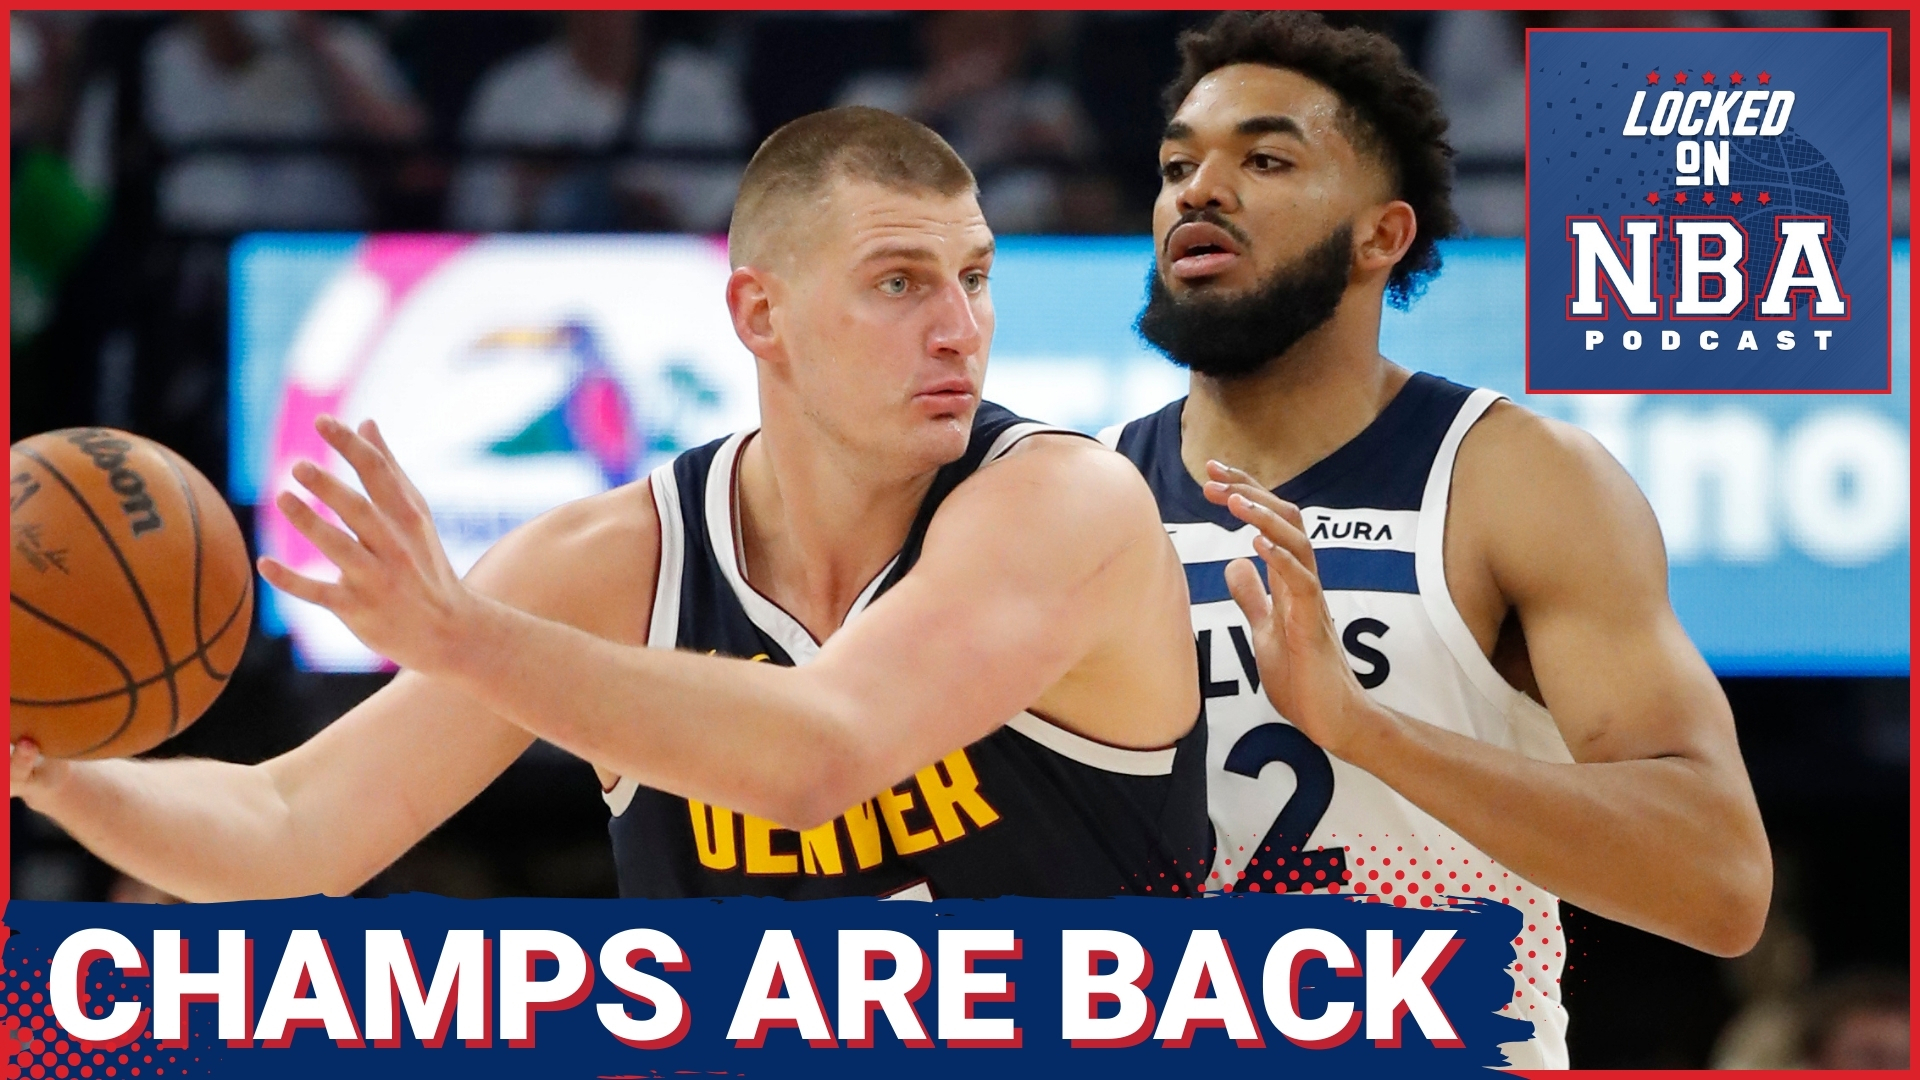 Nuggets Beat Wolves In Game 4 To Reclaim Homecourt | Pacers Blowout Knicks To Even Series 2-2 | Hawks Win NBA Draft Lottery... Keep Or Trade #1 Pick?